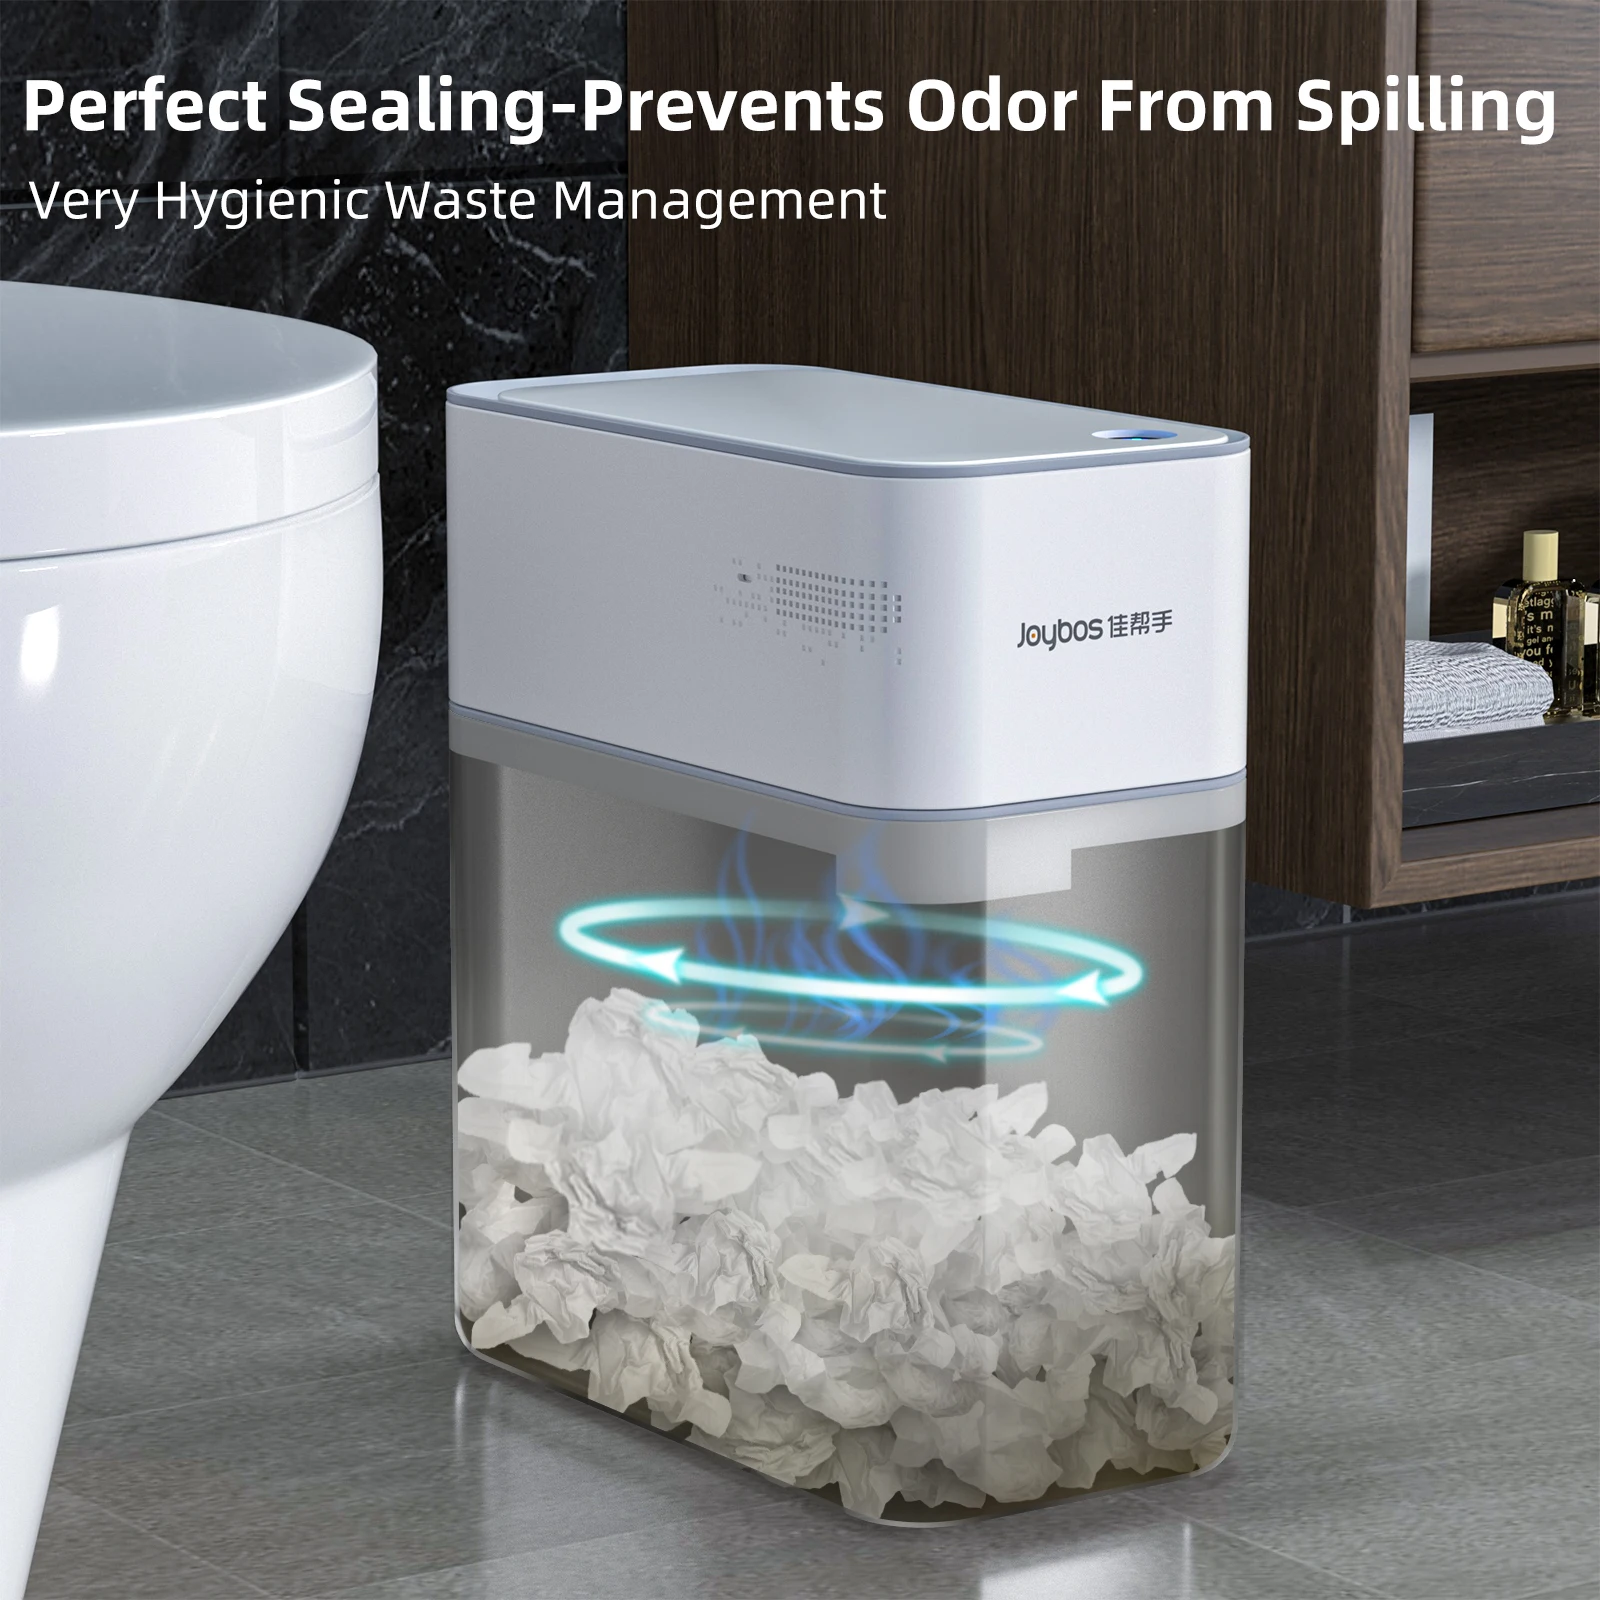 14l Smart Bathroom Trash Can Automatic Bagging Electronic Trash Can White Touchless Narrow Smart Sensor Garbage